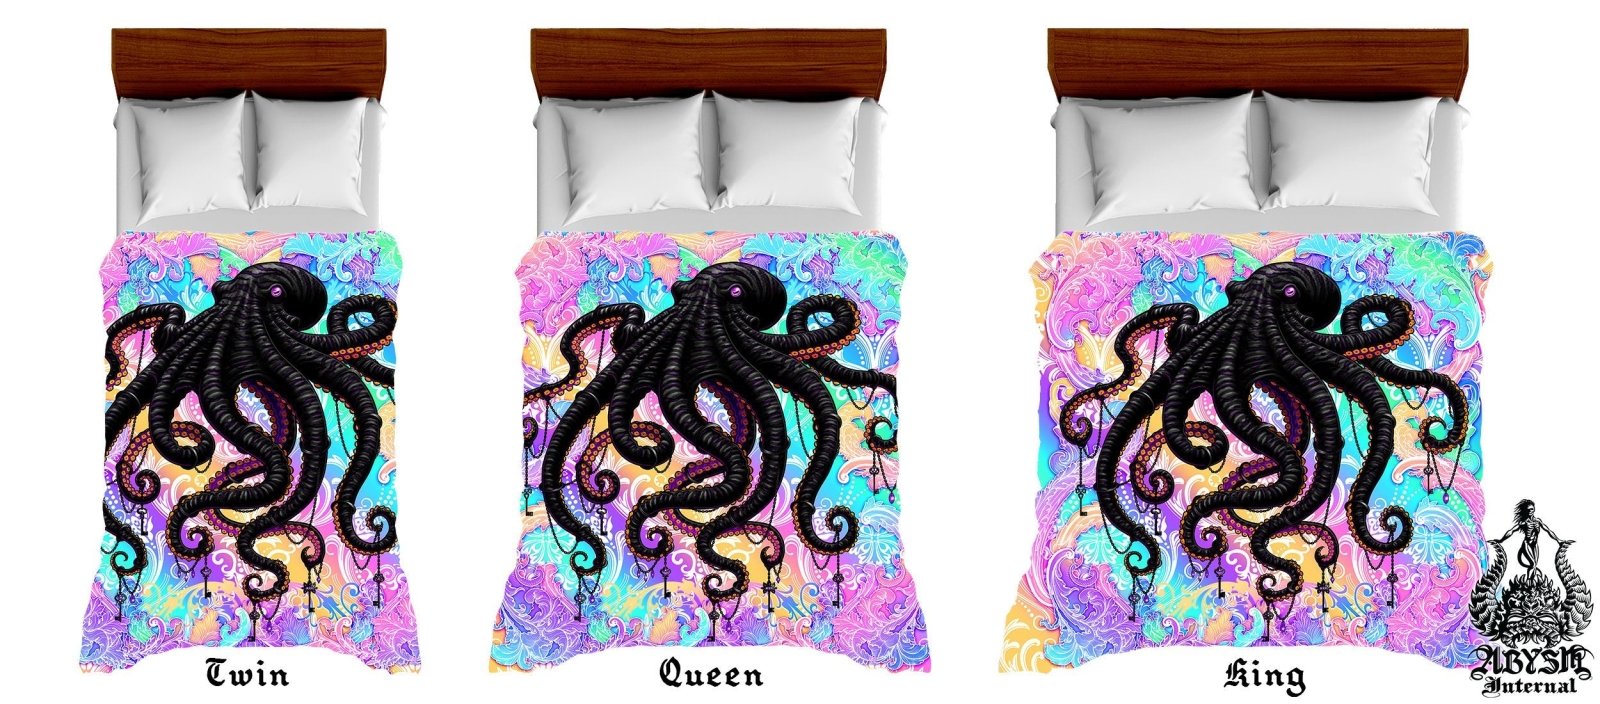 Aesthetic Bedding Set, Comforter and Duvet, Indie Bed Cover, Kawaii Gamer Bedroom Decor, King, Queen and Twin Size - Black and Pastel Punk Octopus - Abysm Internal